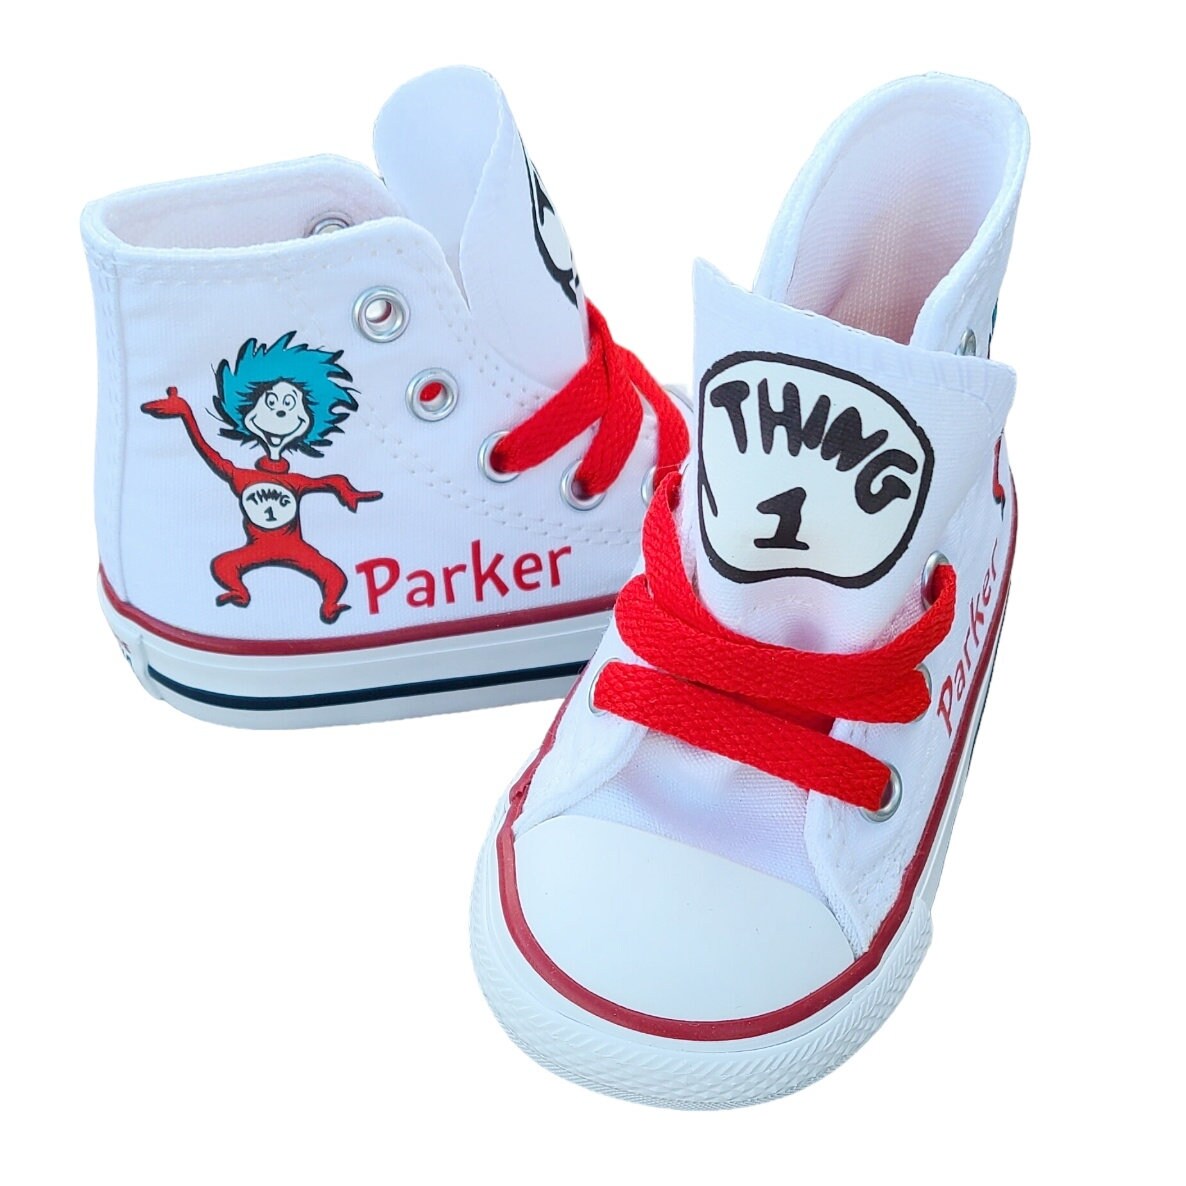 Buy Dr Seuss Converse Thing Thing 2 High Tops Sneakers Online in India - Etsy